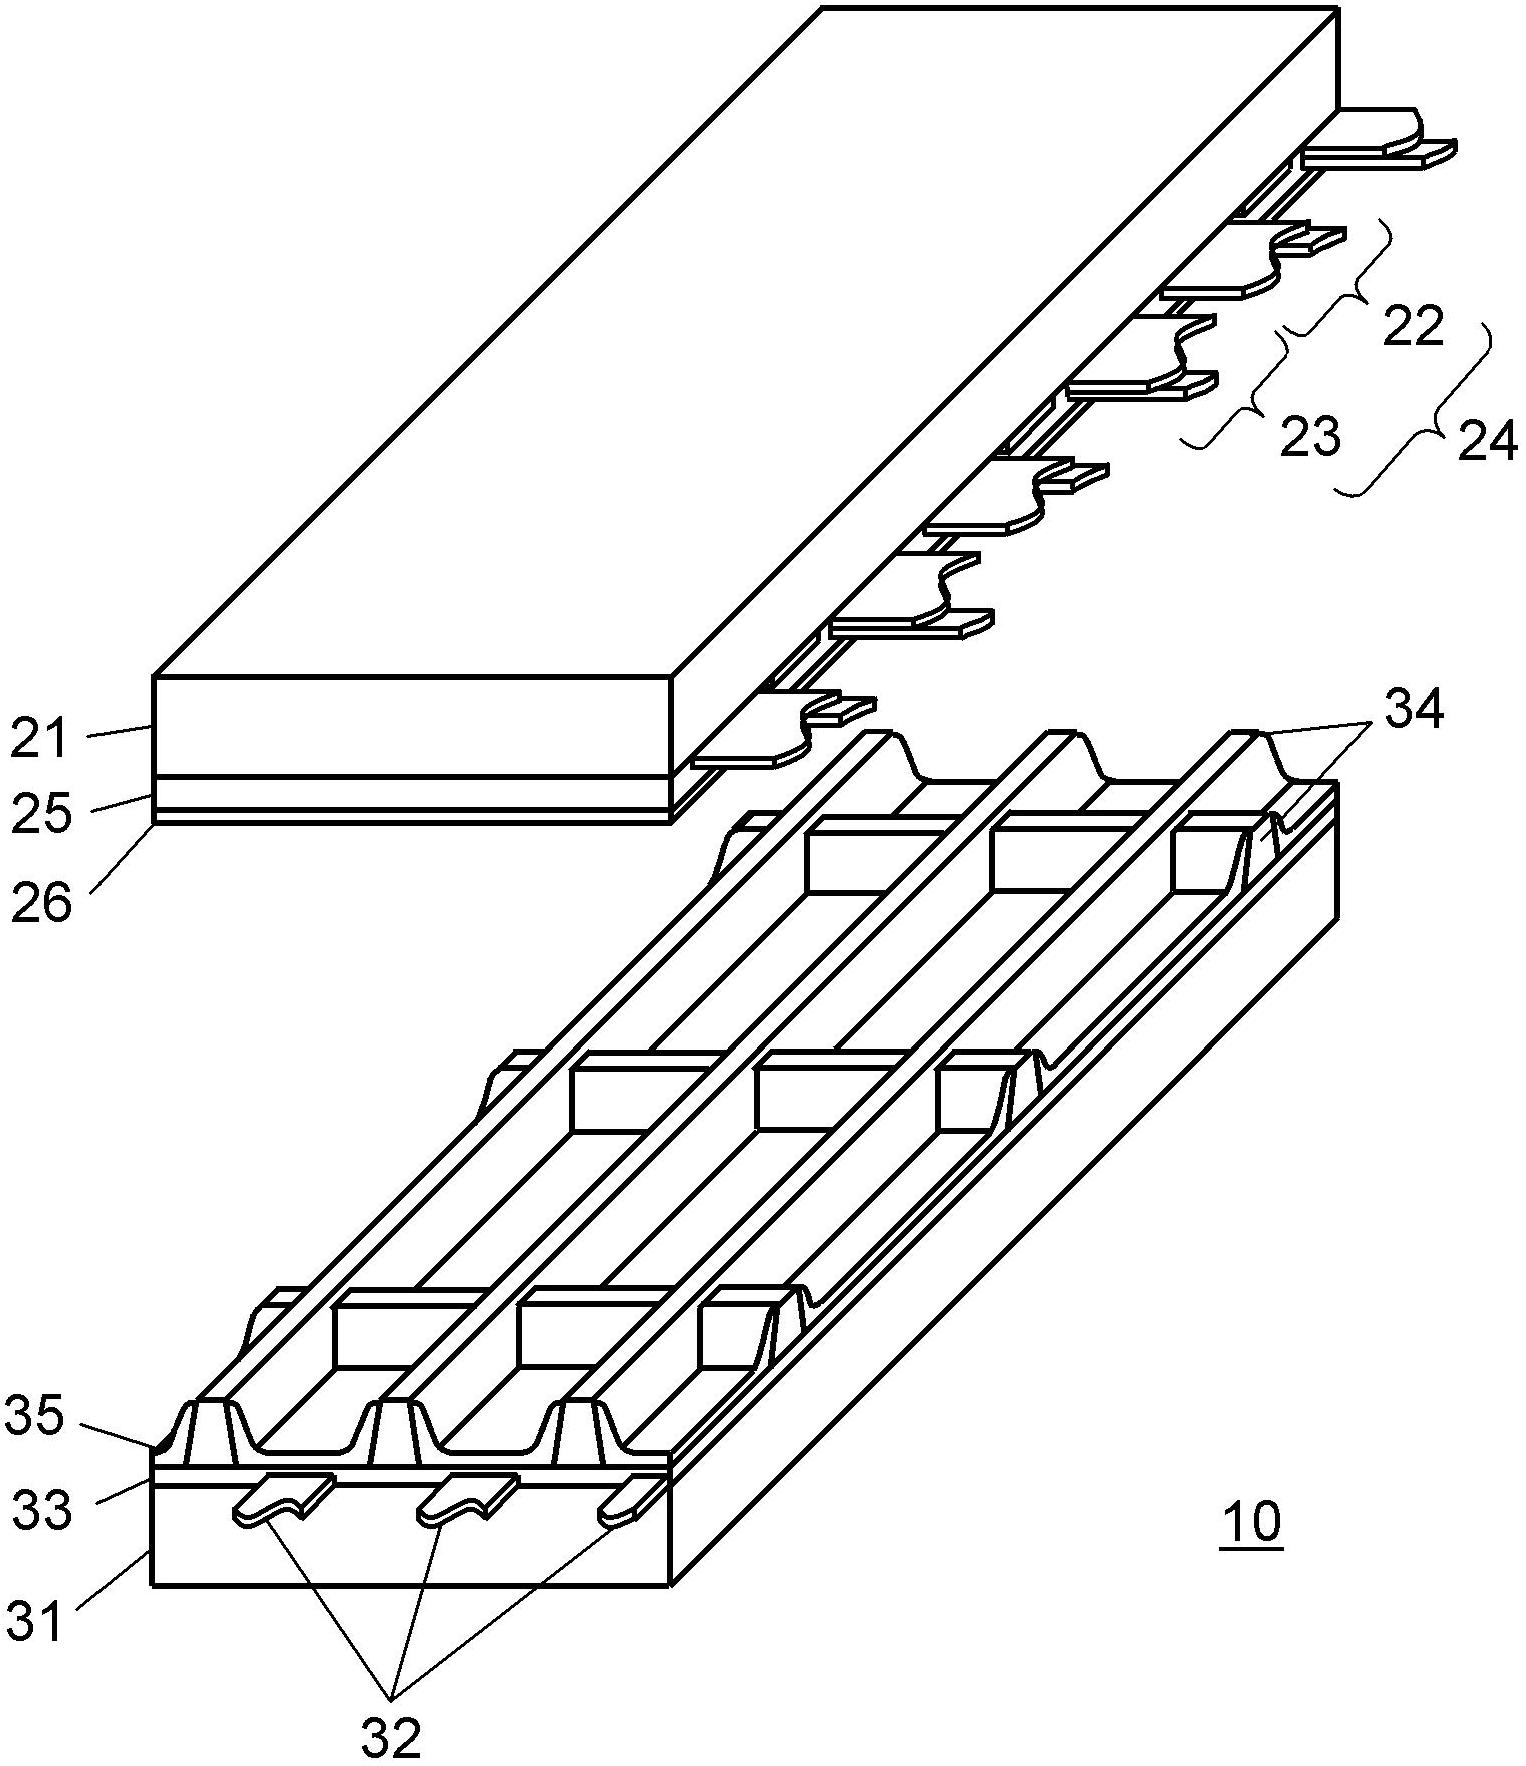 Plasma display device, plasma display system, and method of controlling shutter glass for plasma display device